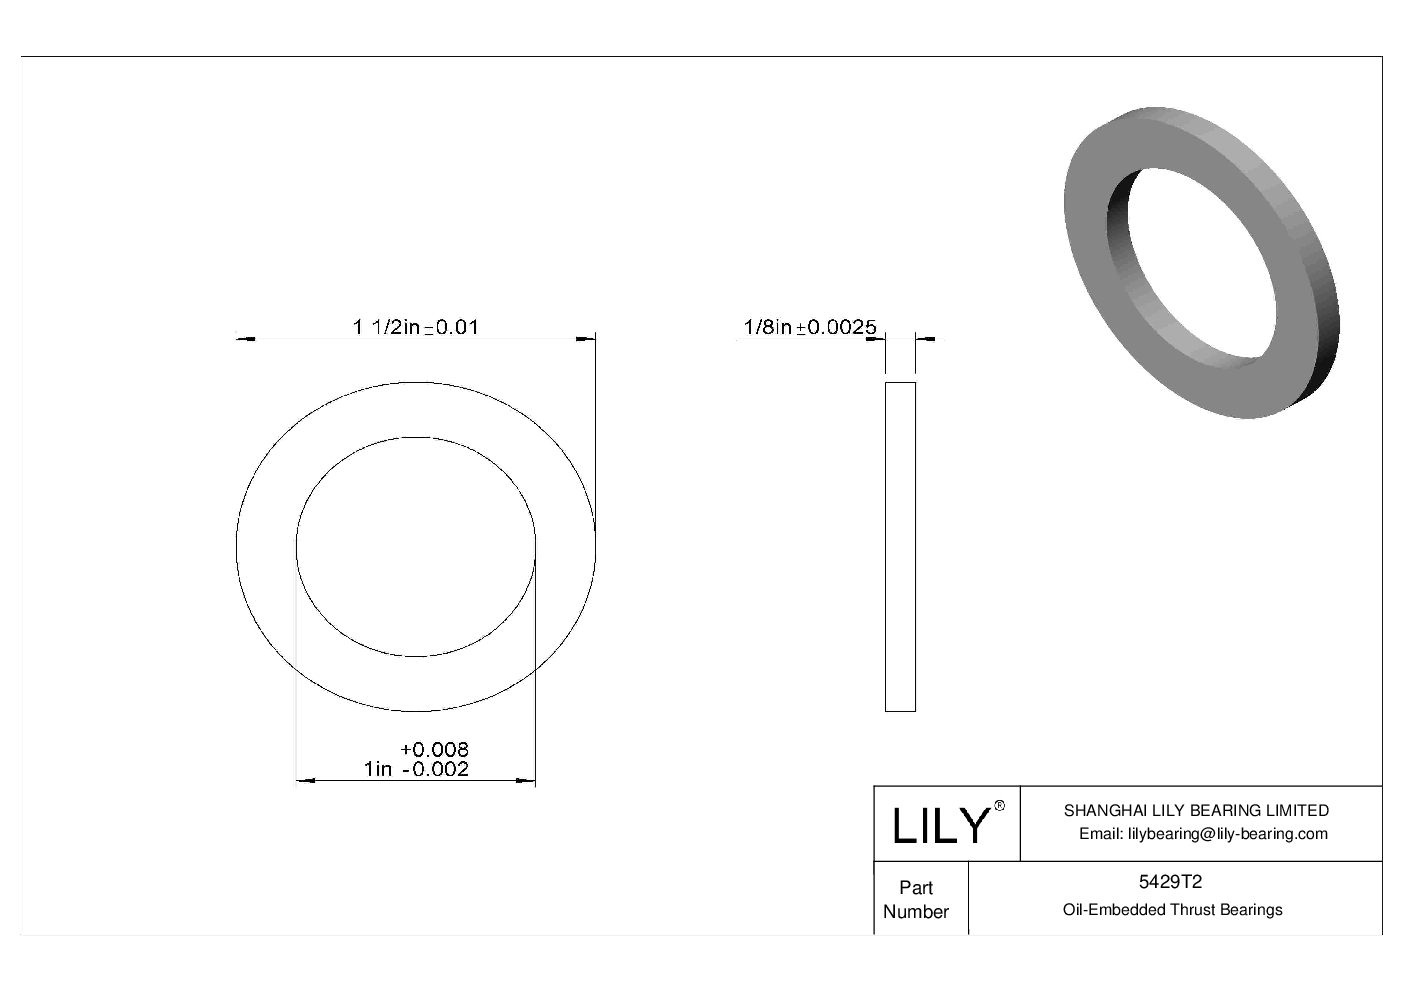 FECJTC Food Industry Oil-Embedded Thrust Bearings cad drawing